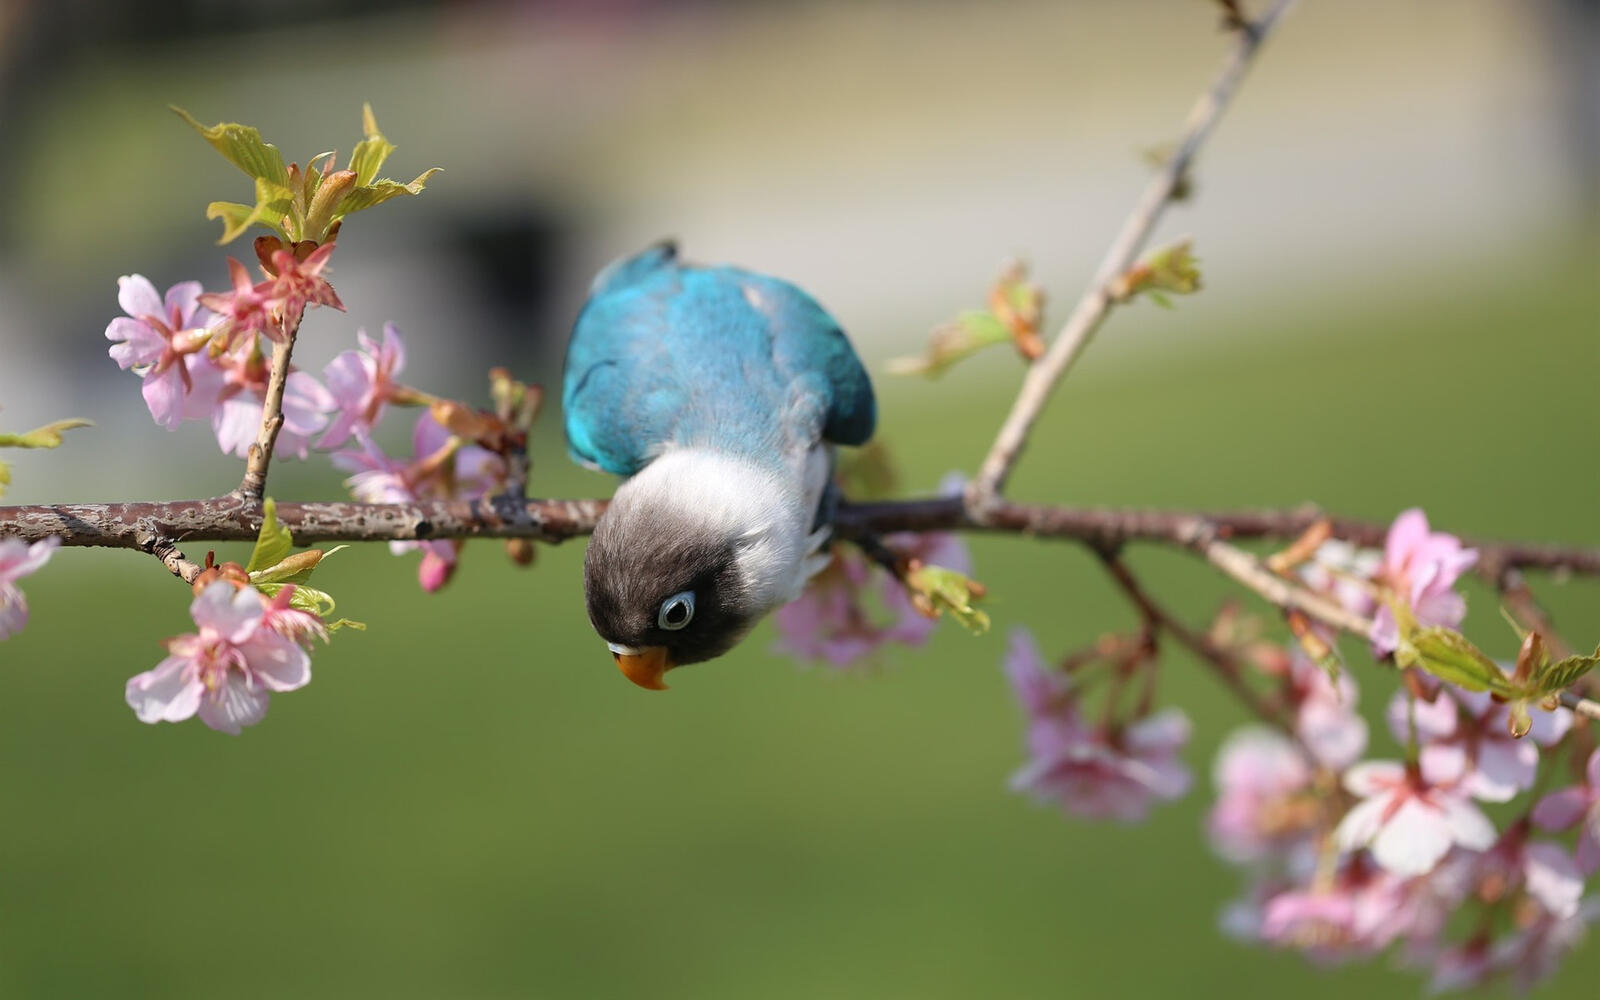 Free photo A wavy parrot with blue feathers sits on a branch with pink flowers